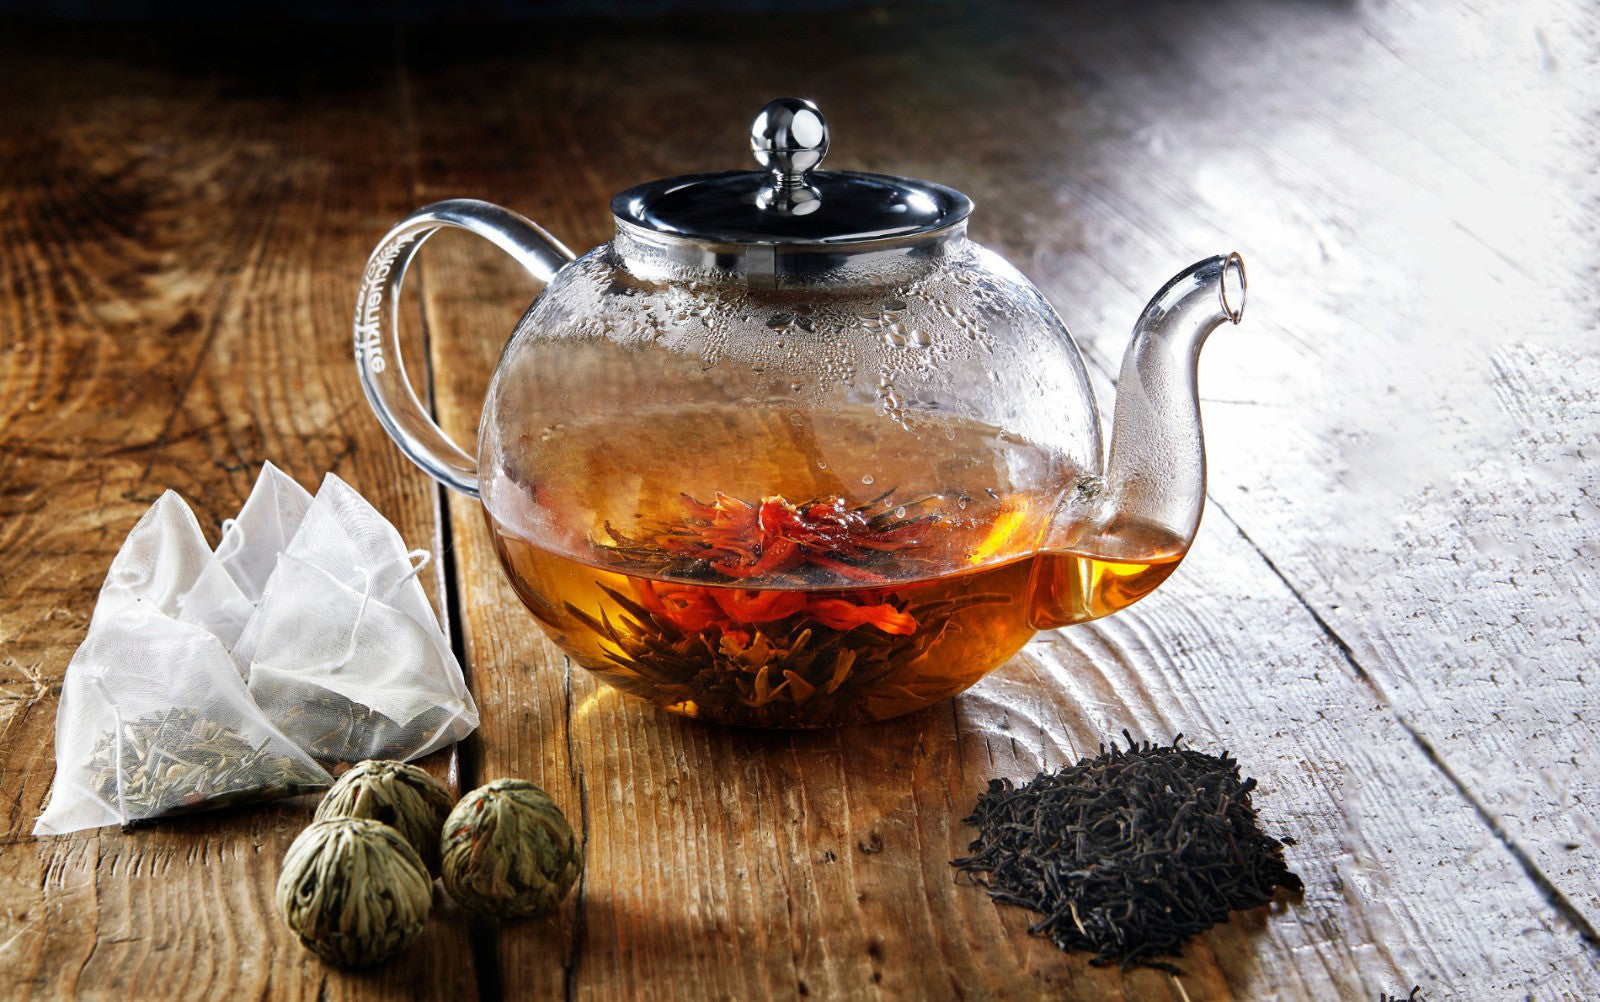 Do You Think Flowering Tea Is Revolting Or Amazing? (PHOTOS)